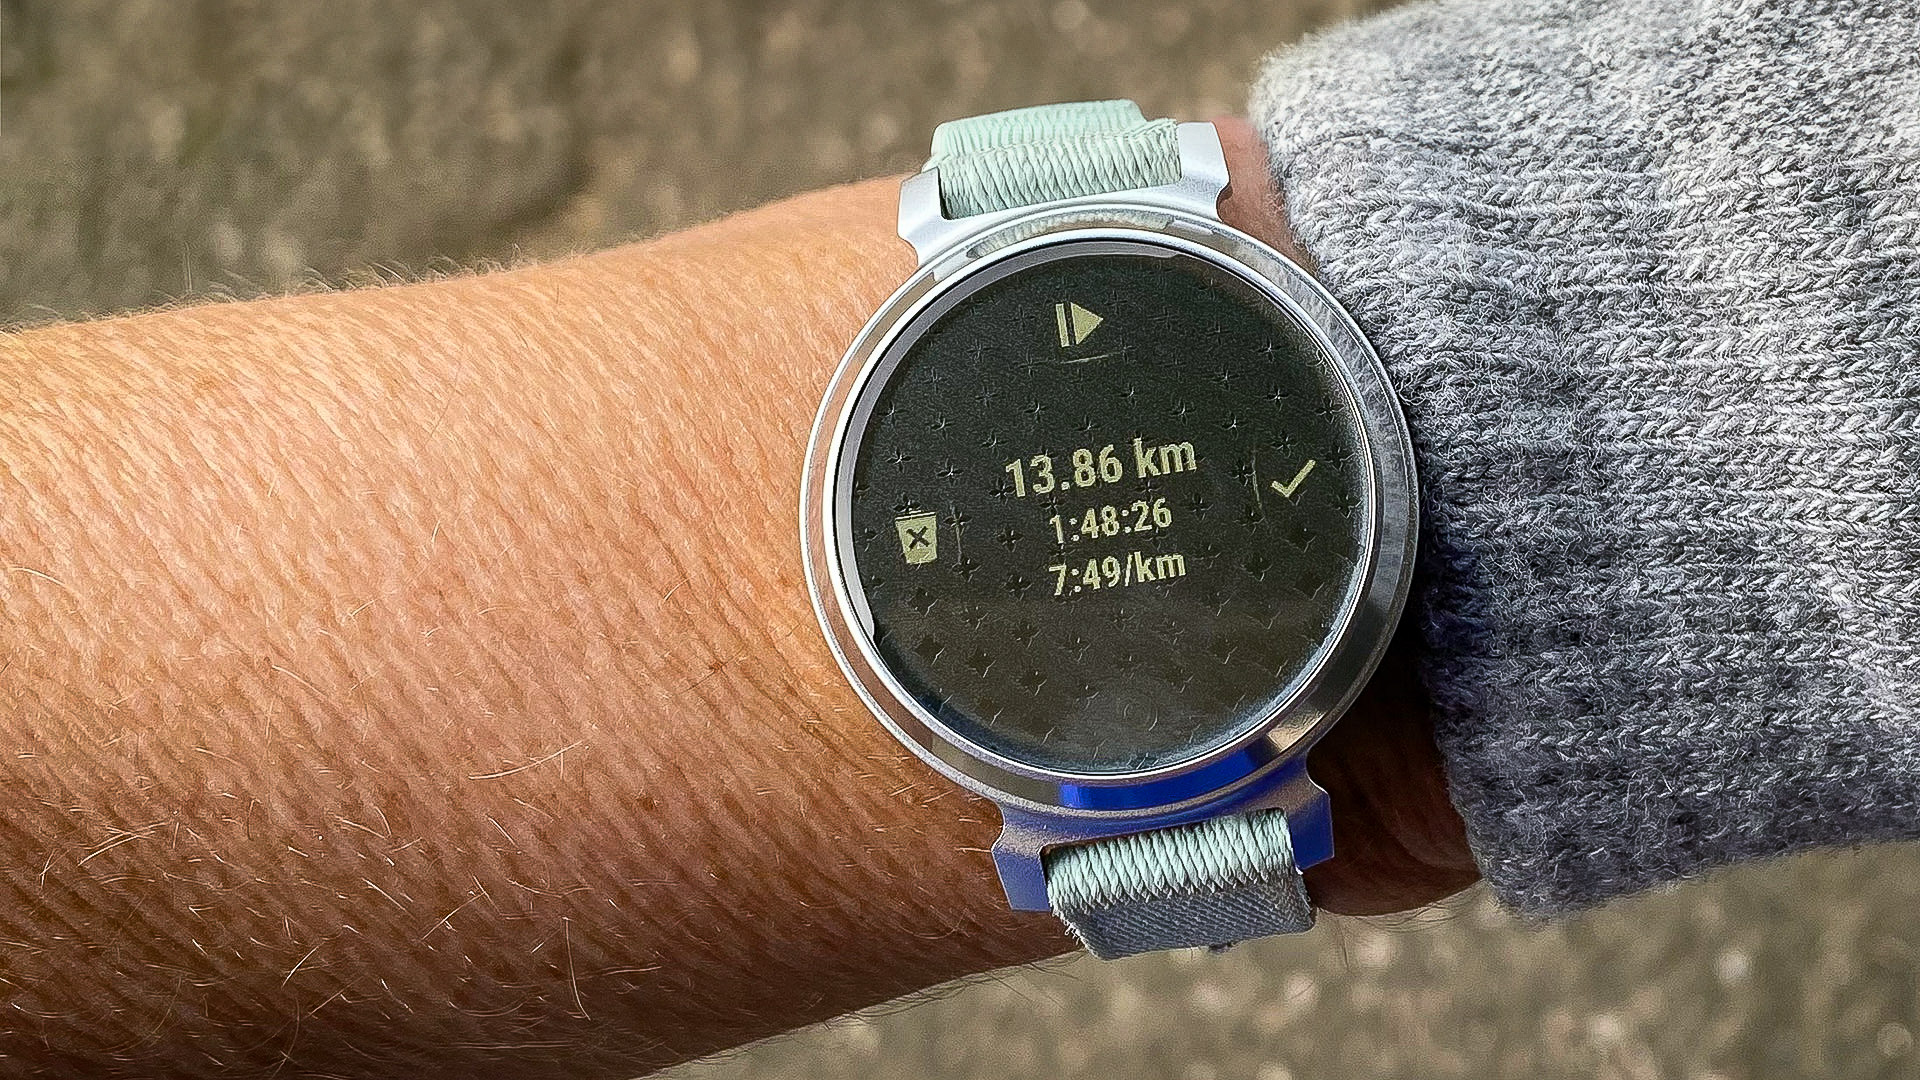 Garmin Vivoactive 5 In-Depth Review: Now With An AMOLED Display!